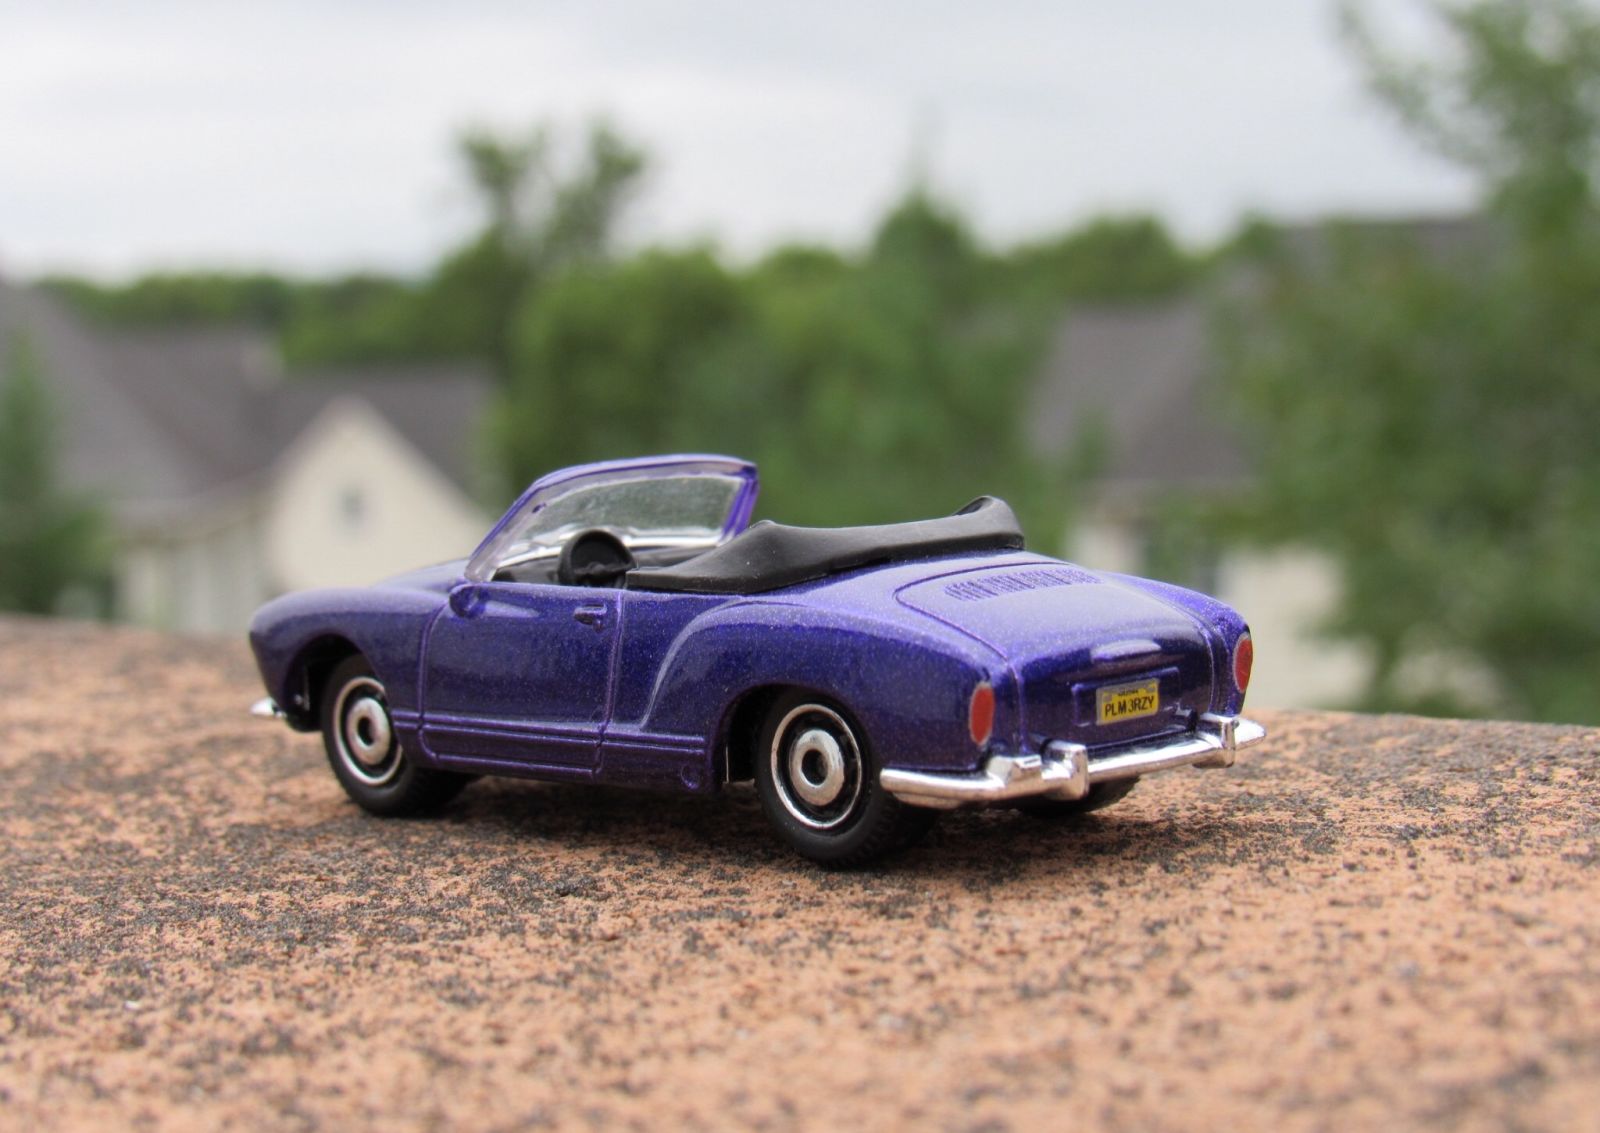 Illustration for article titled Teutonic Tuesday: Matchbox VW Karmann Ghia Convertible